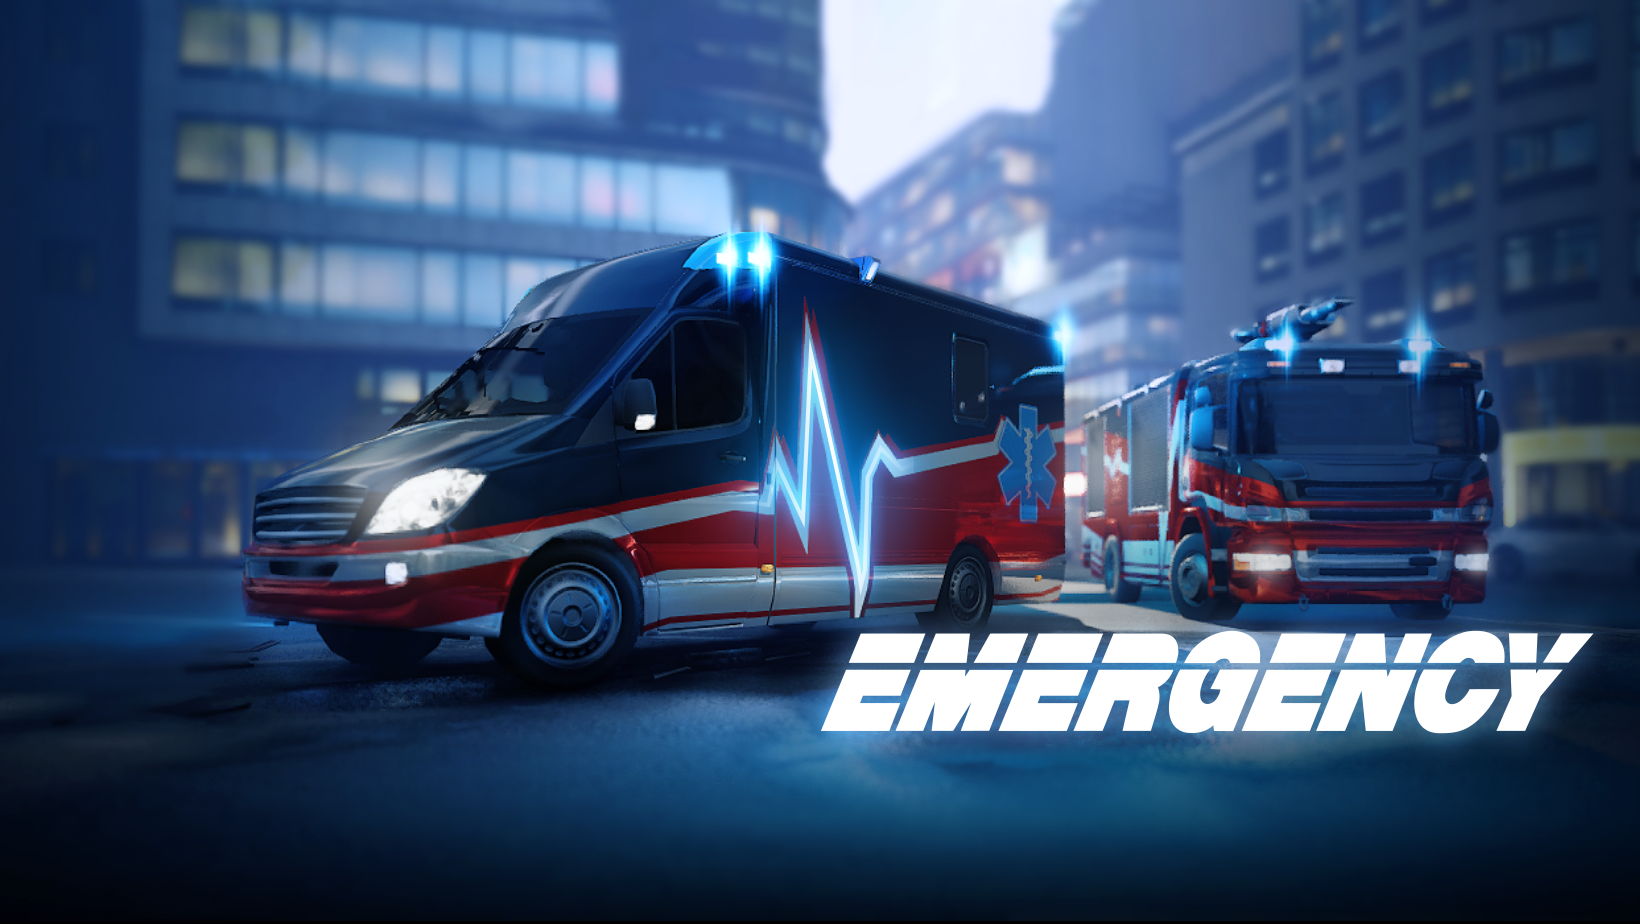 Real-Time Strategy on Mac: EMERGENCY Now Available for Apple Enthusiasts